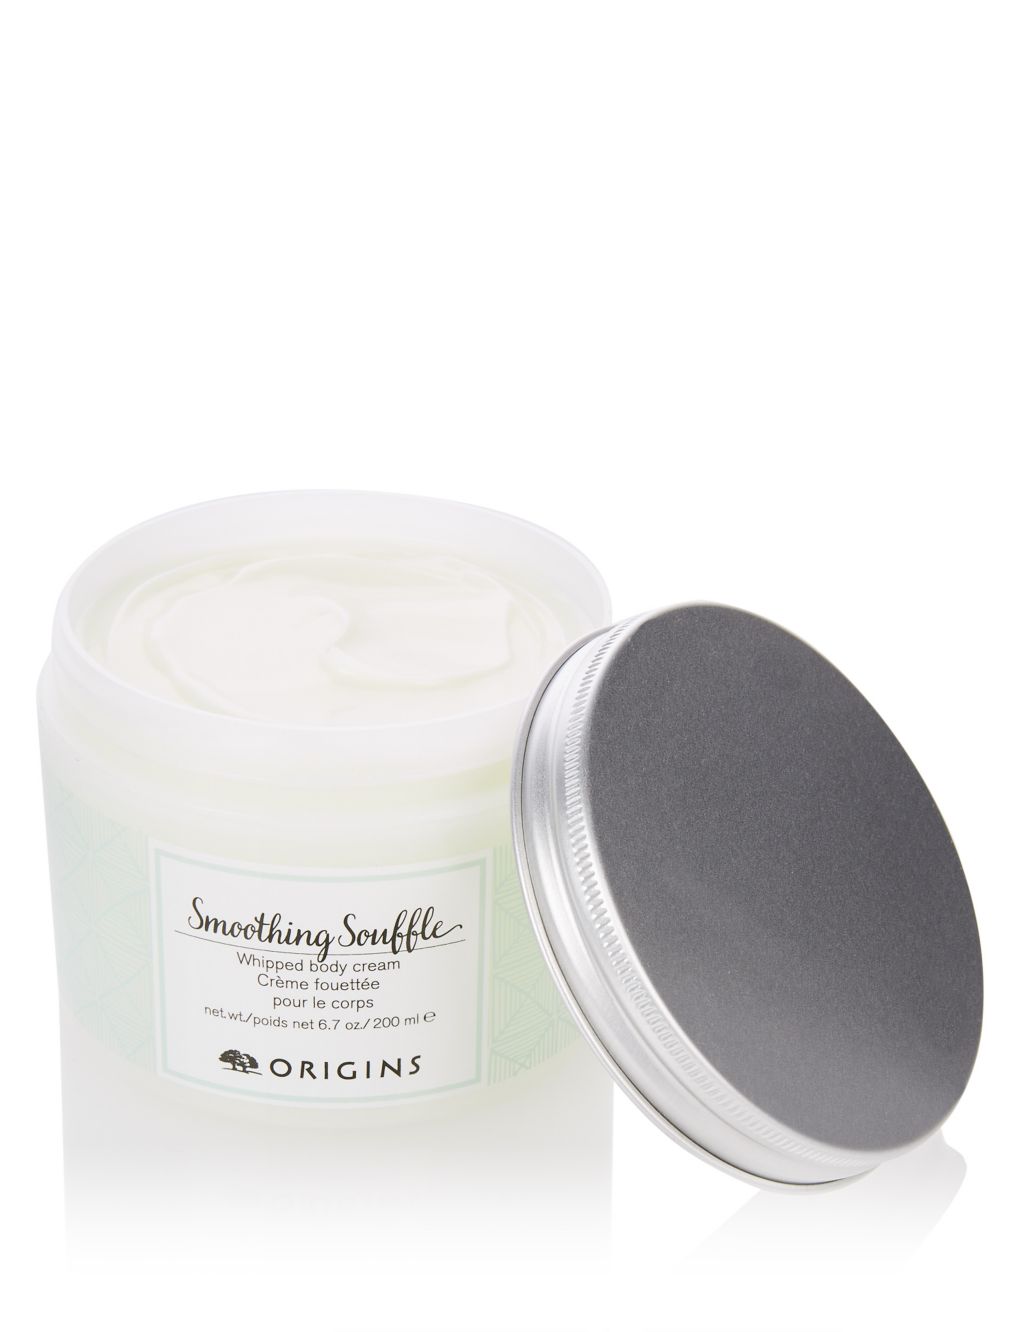 Smoothing Souffle Whipped Body Cream 200ml 1 of 3